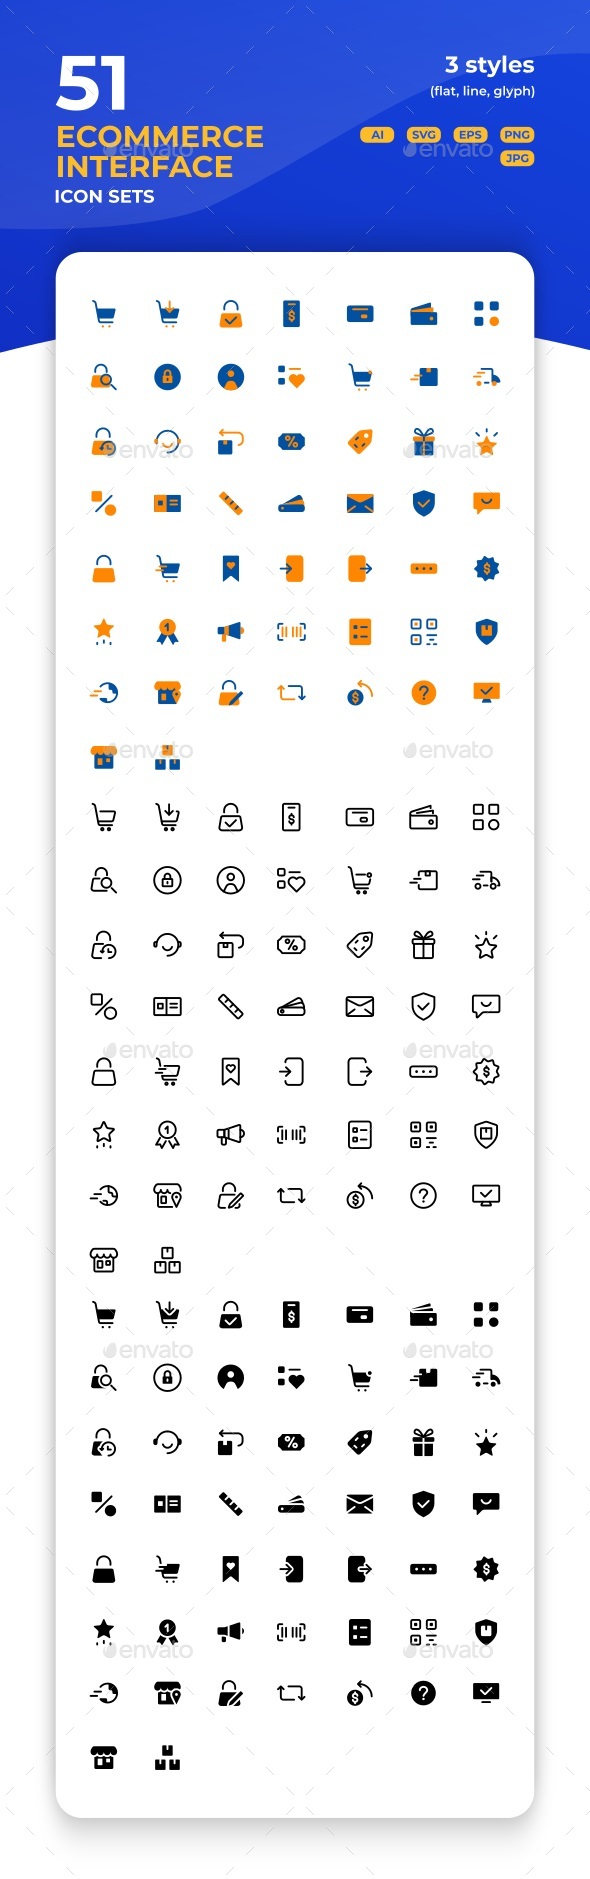 [DOWNLOAD]Ecommerce Interface Icon Pack